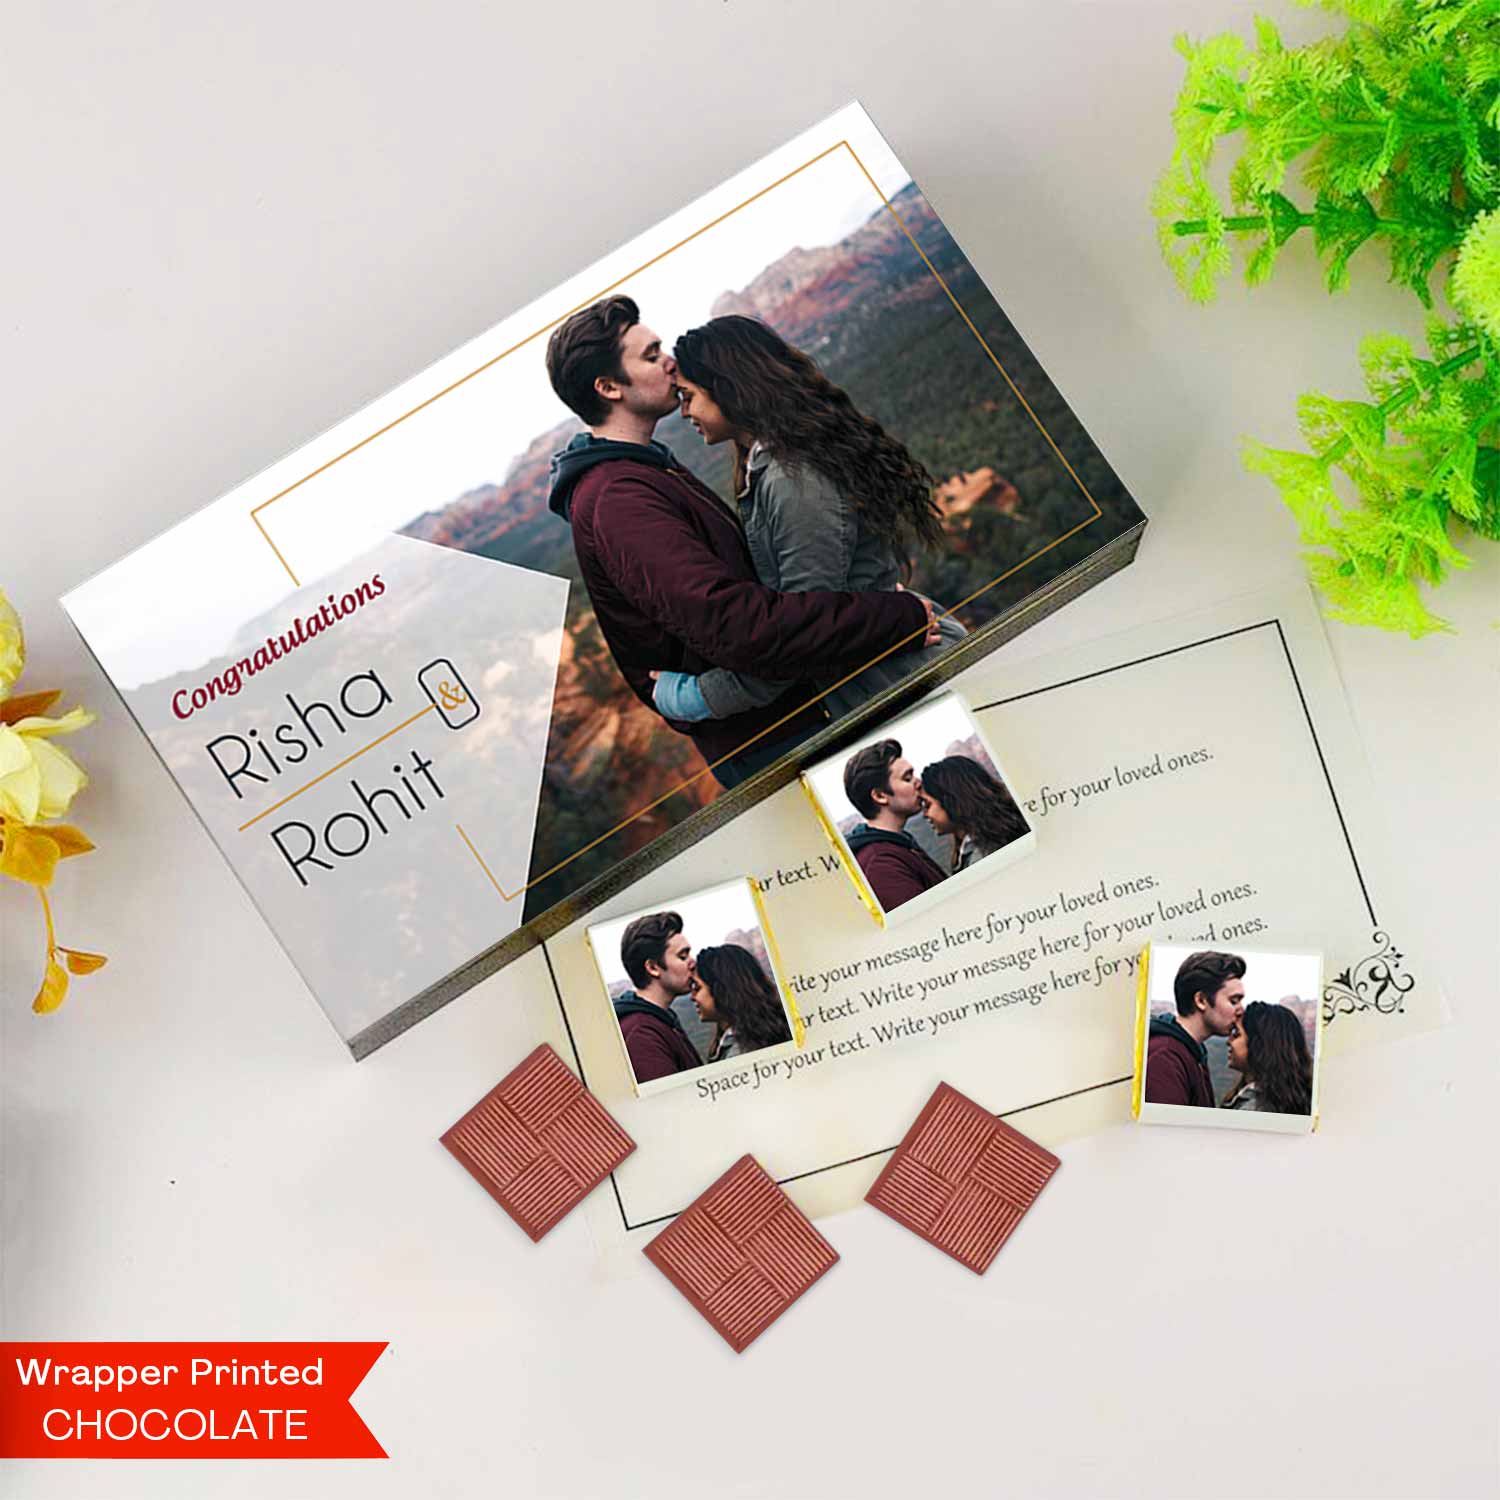 Cute couple photo with Name Printed Chocolates